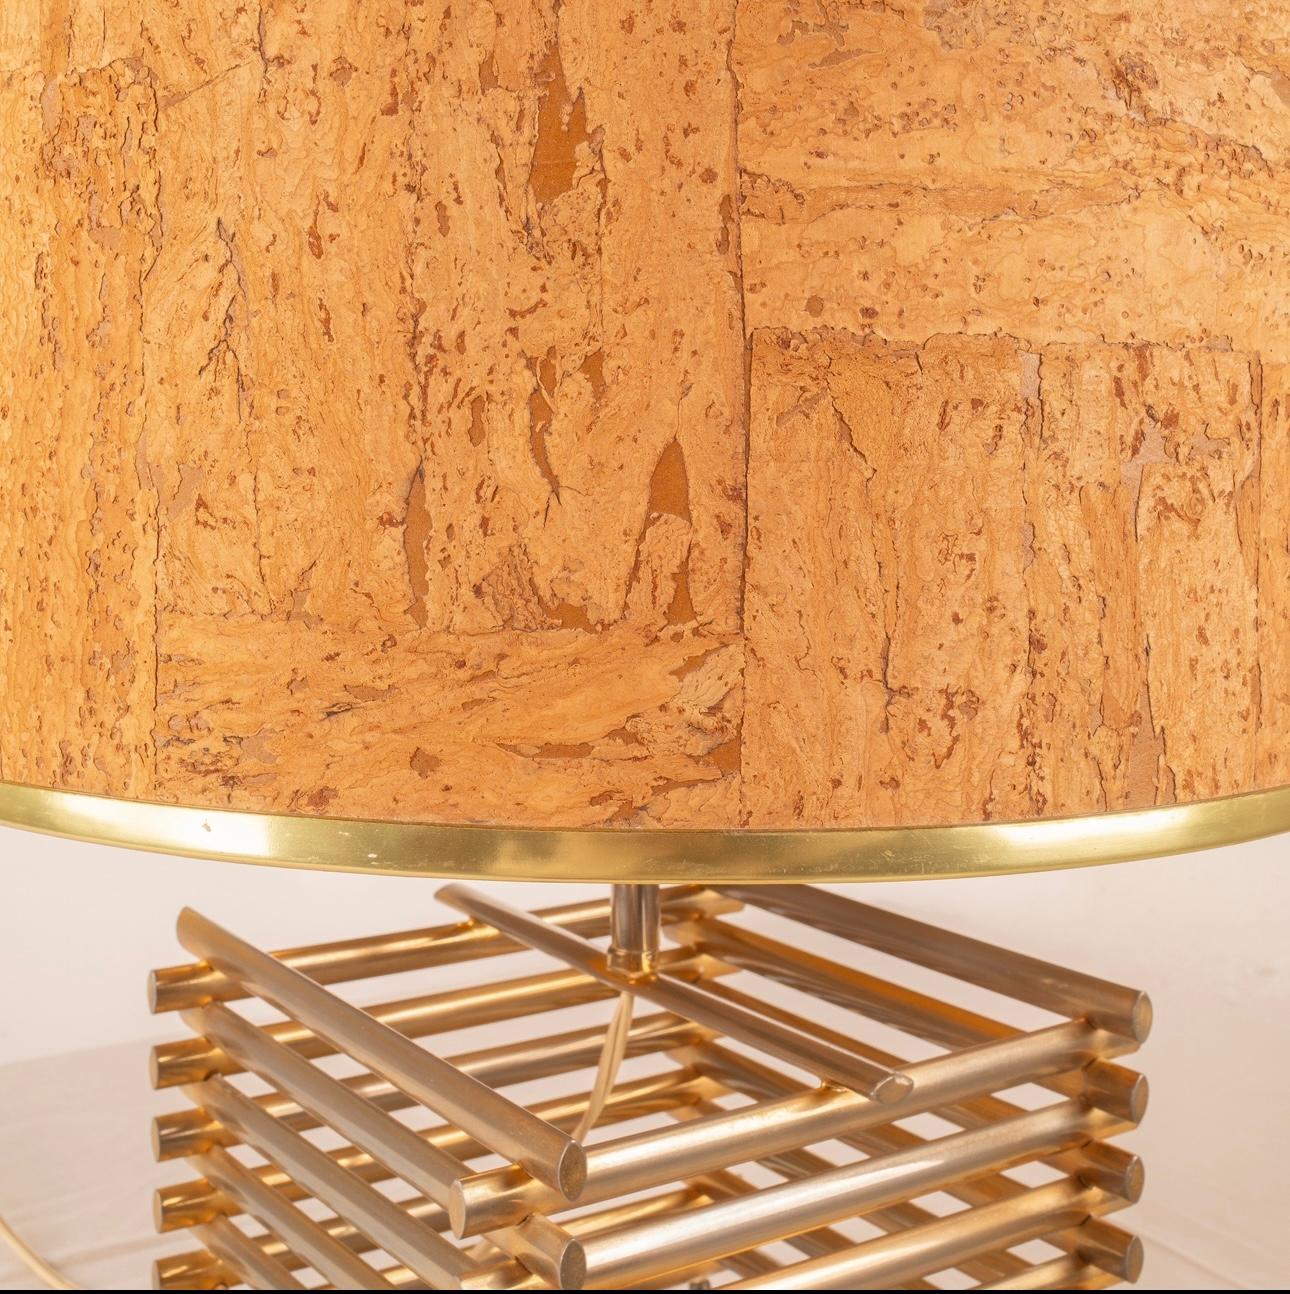 Discover this vintage table lamp from the 1960s-70s, a true vintage design gem made with 18kt gold-plated metal elements arranged in a square grid.
Its style and the materials used suggest to us that it may belong to the prestigious productions of